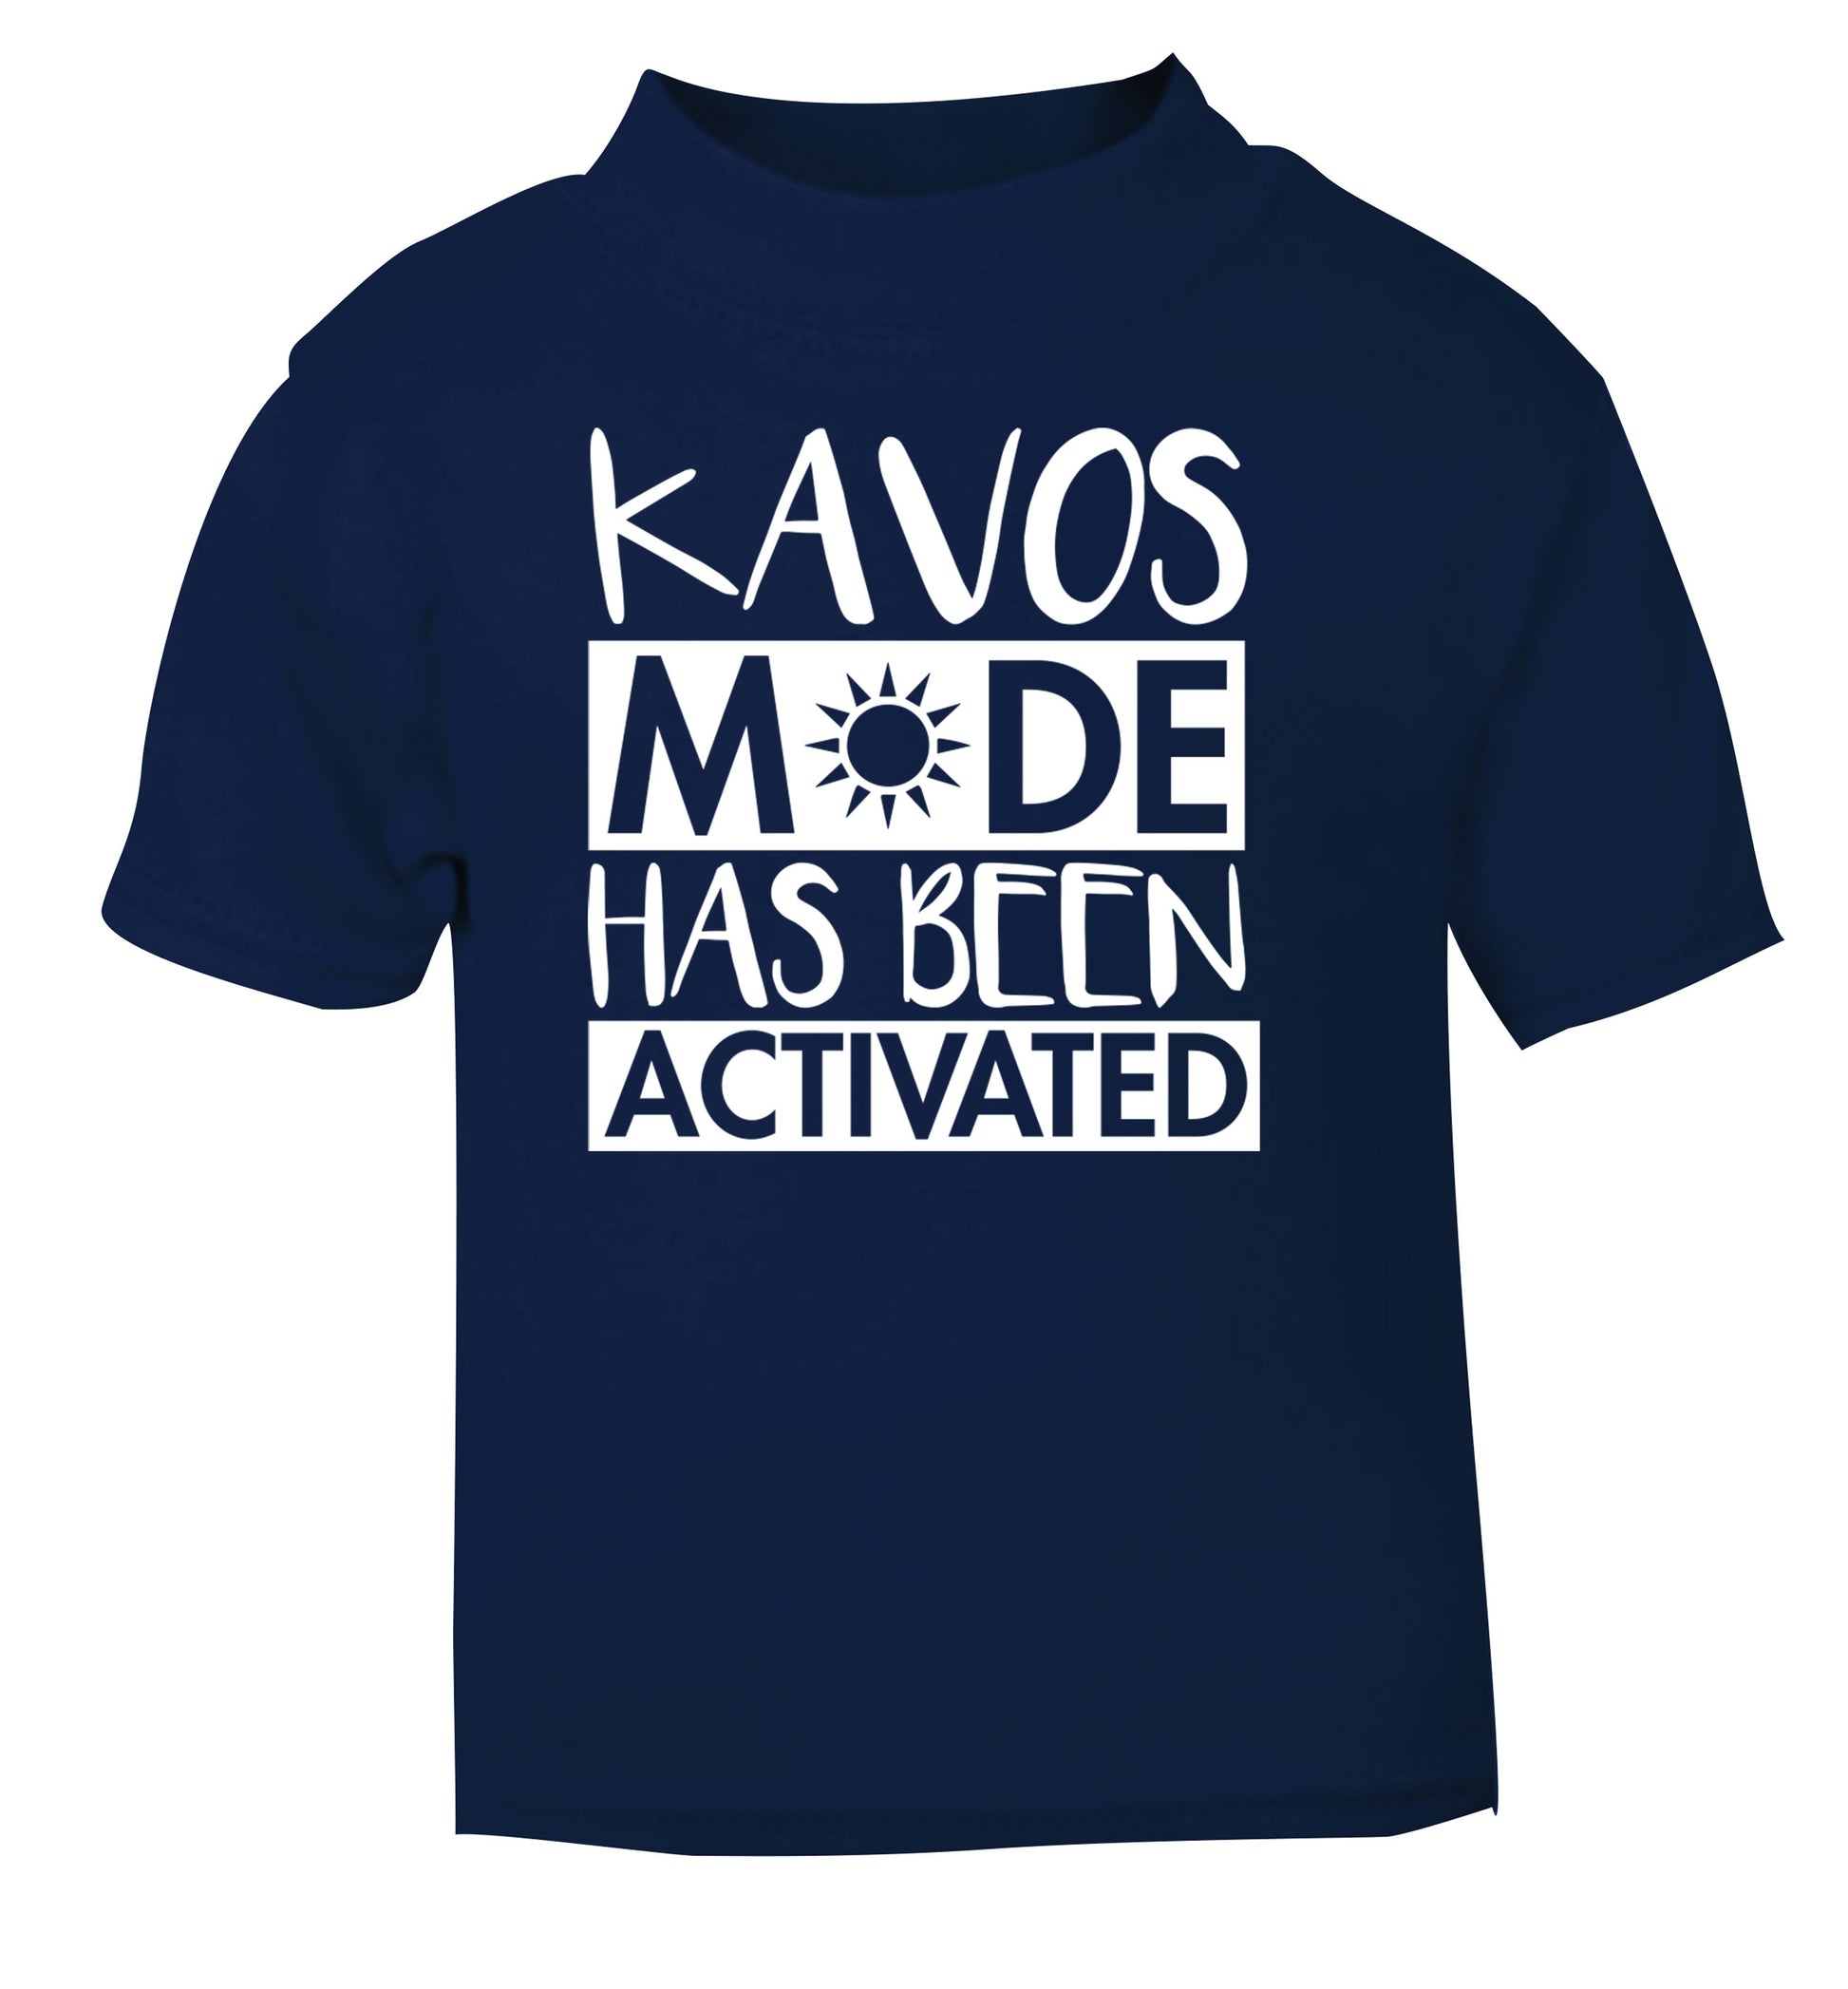 Kavos mode has been activated navy Baby Toddler Tshirt 2 Years